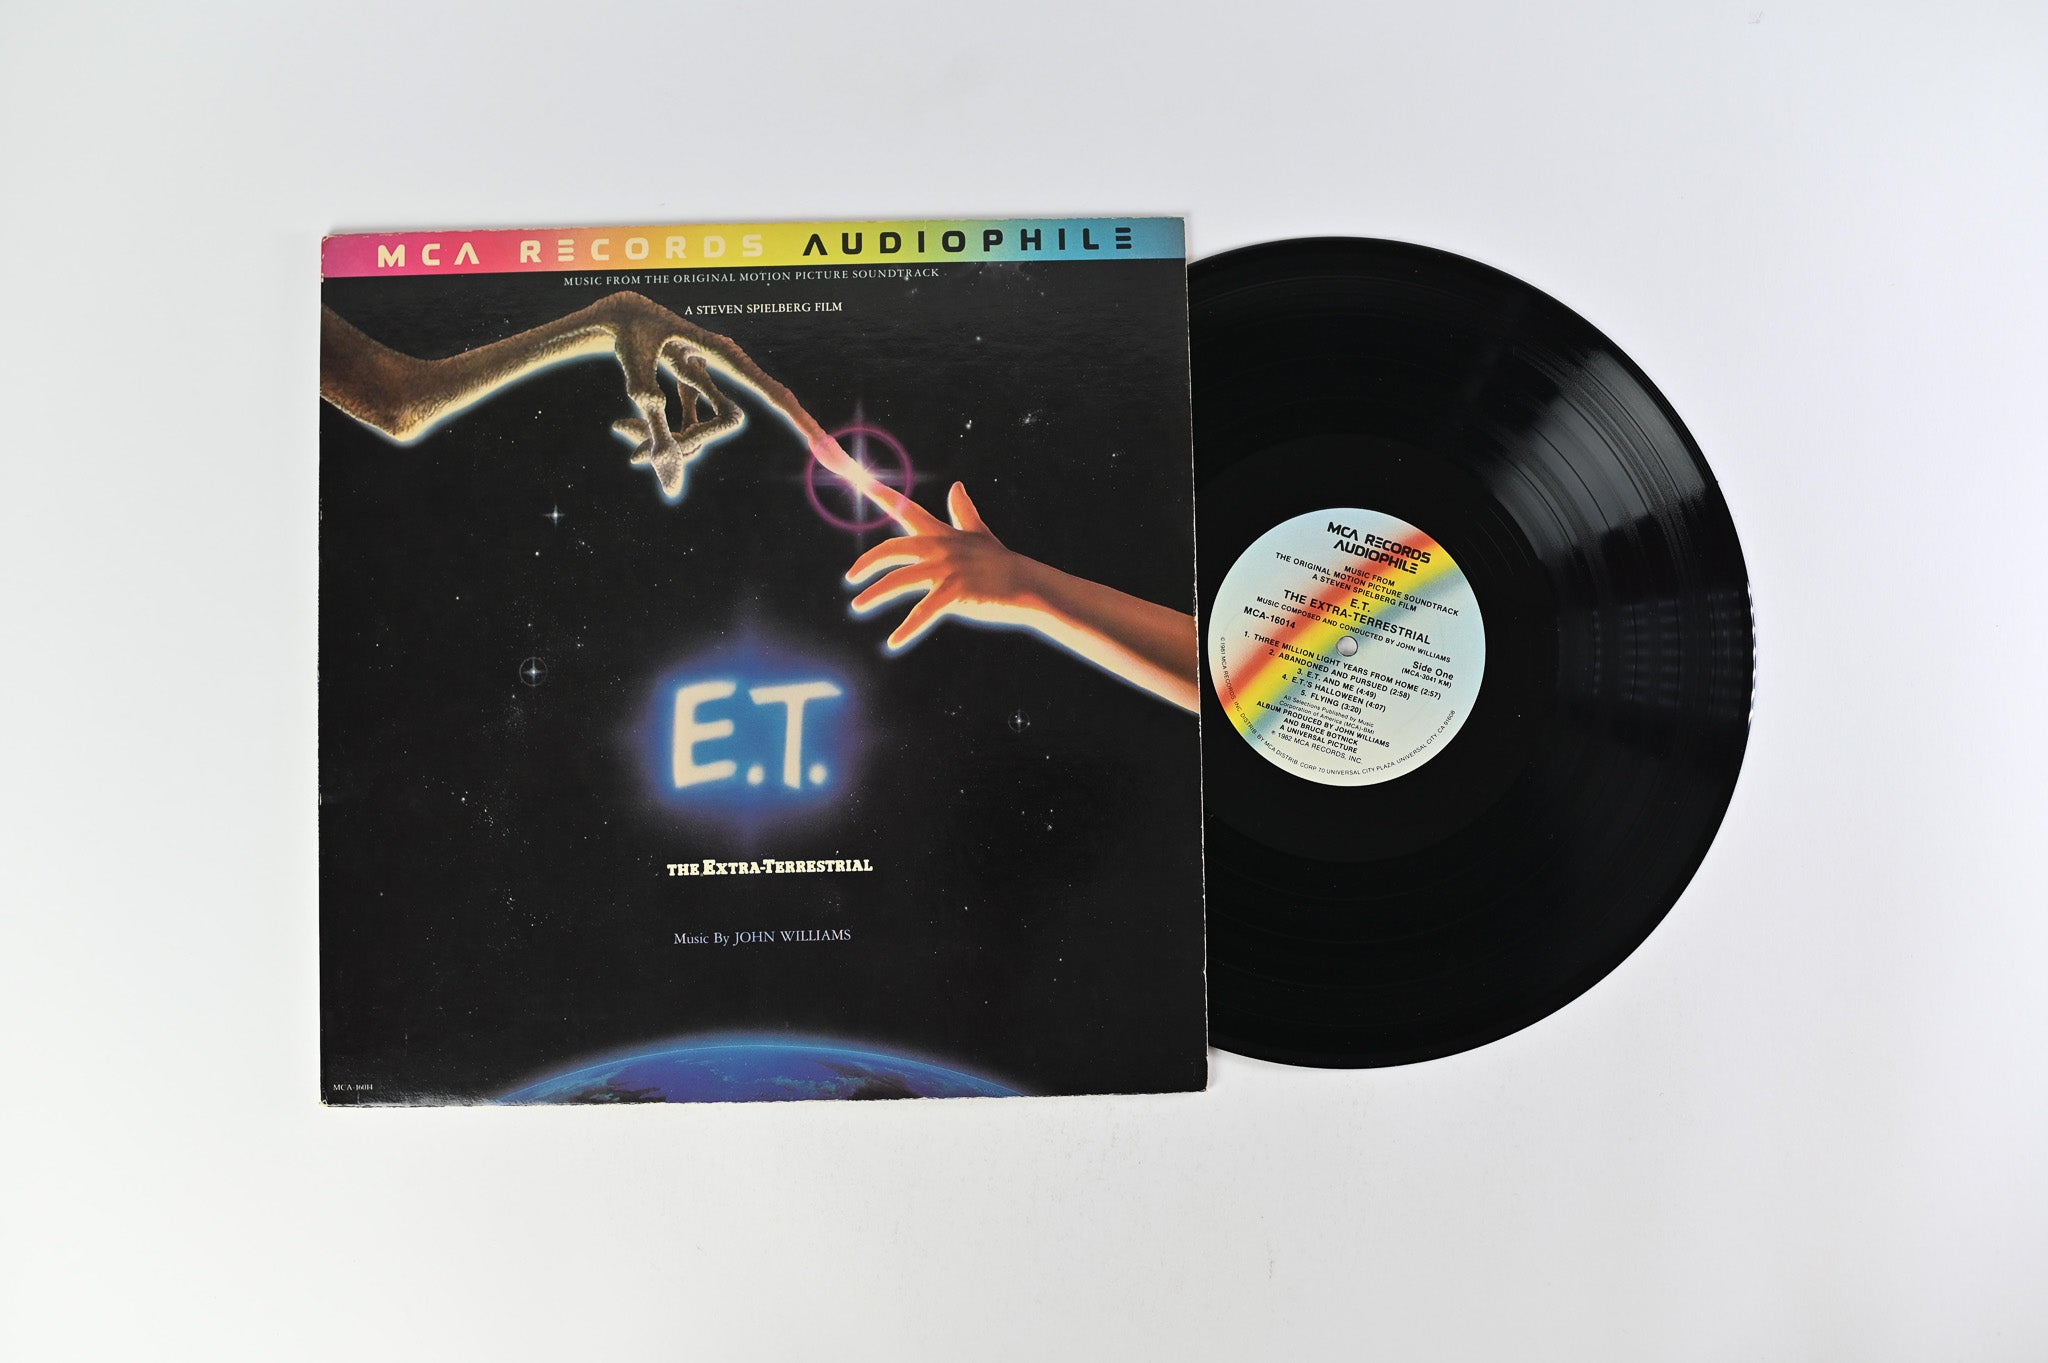 John Williams - E.T. The Extra-Terrestrial (Music From The Original Motion Picture Soundtrack) on MCA Records Audiophile